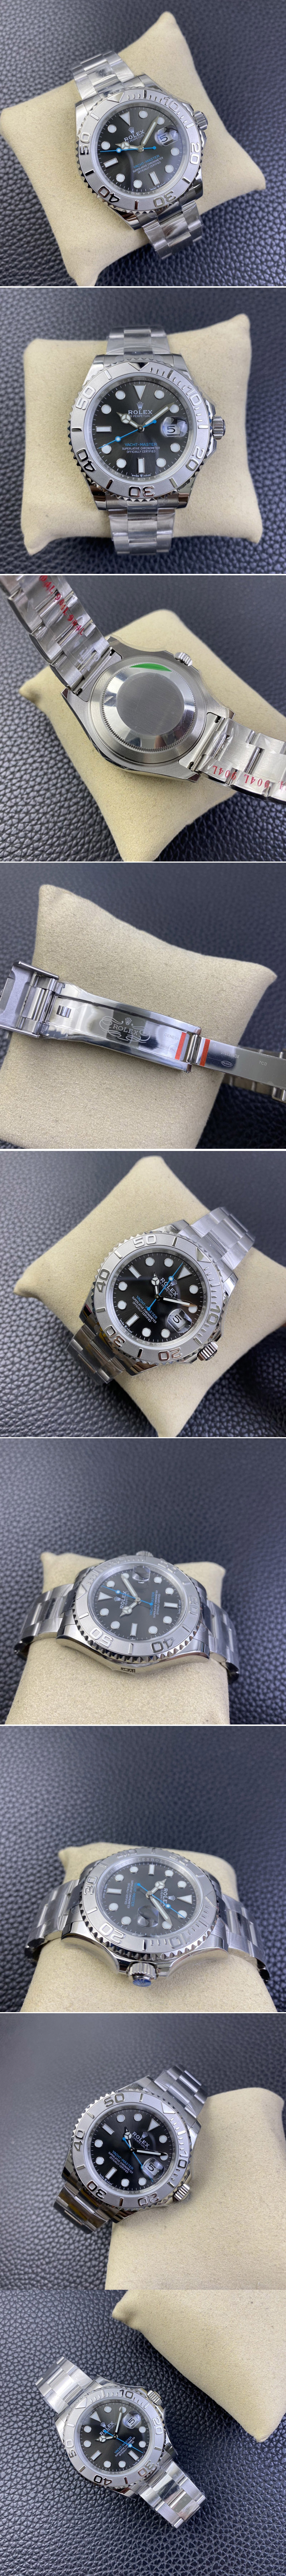 Replica Rolex Yacht-Master 126622 GSF 1:1 Best Edition Gray Dial on SS Bracelet A2836